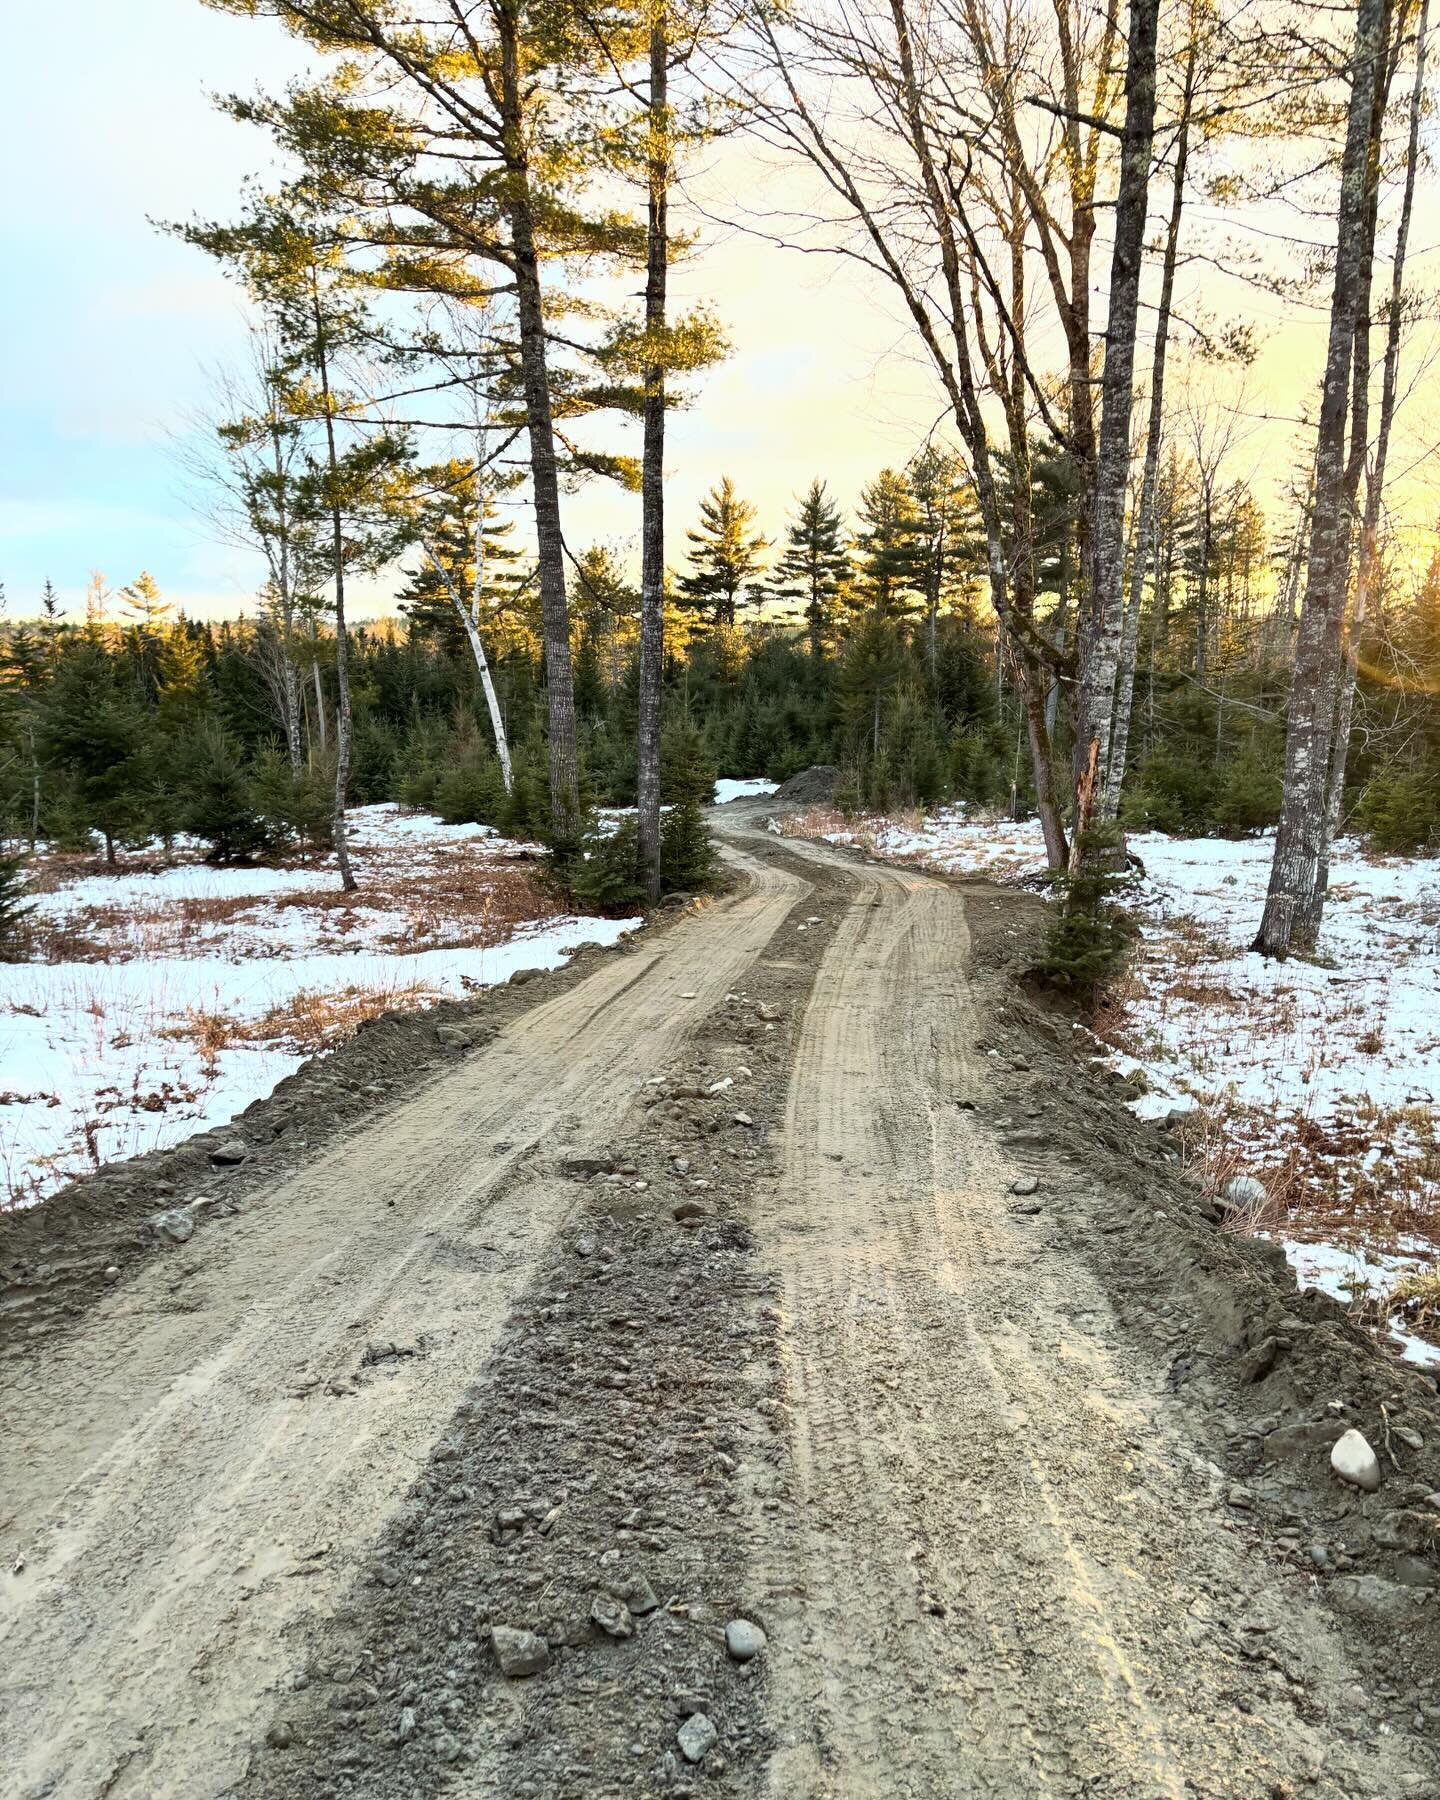 This winter, lots of groundwork has been completed, utilities are in! We&rsquo;re so thankful for all of the hard work! Here are some photos of the work in progress! Updated photos to come! 

#workinprogress #yurtliving #mainewinter